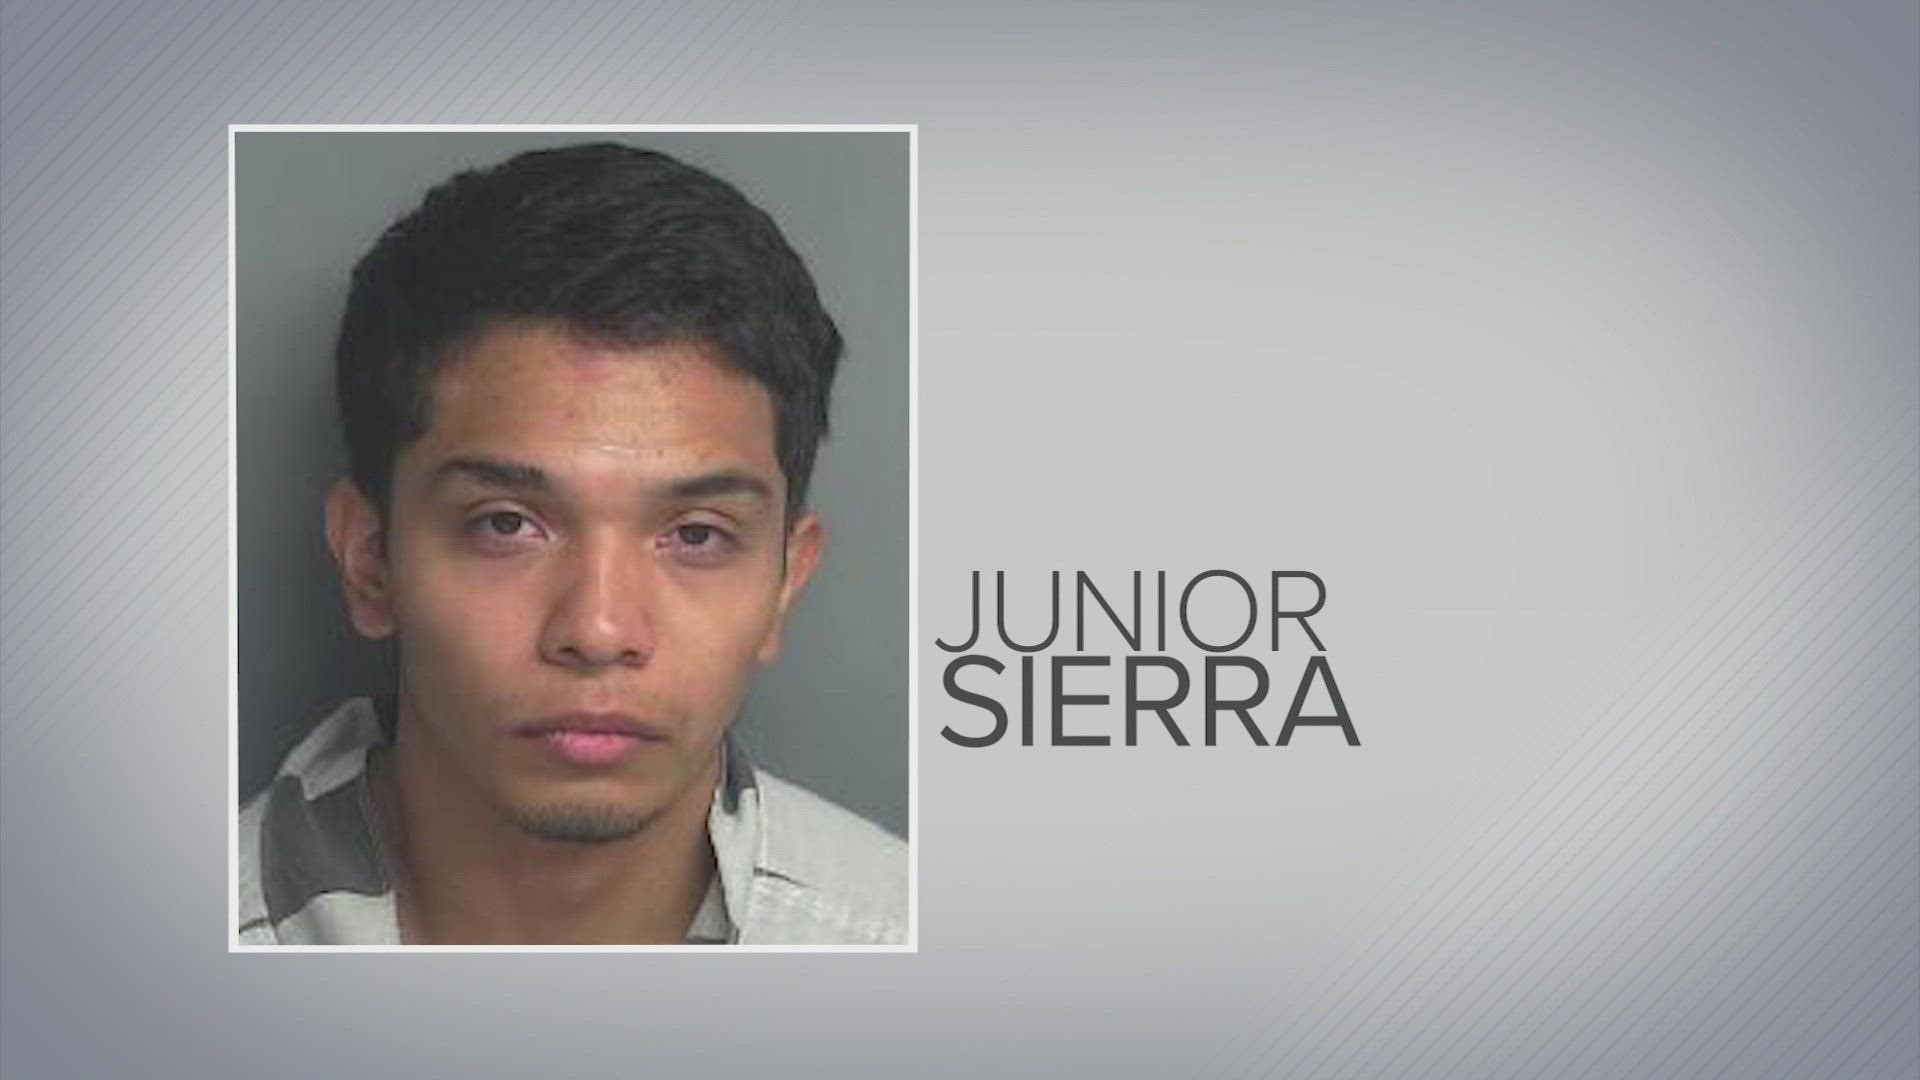 Authorities said Junior Sierra, 25, worked and lived at the apartment complex. They said he broke into a unit, took his pants off and climbed into bed with a girl.